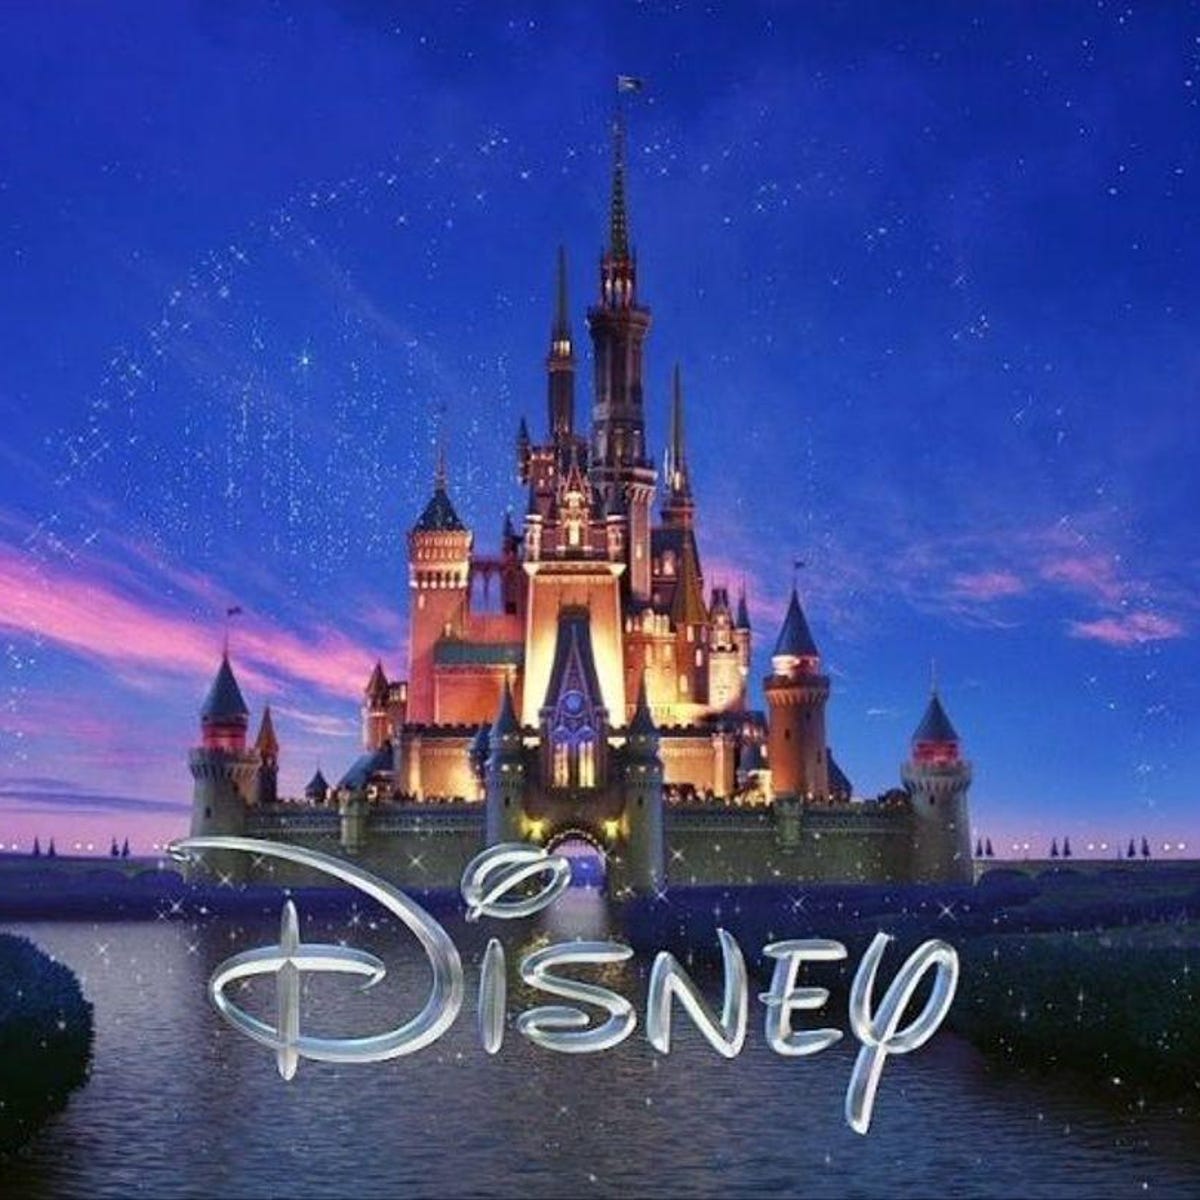 Disney Plus August 2020: Every new movie and TV show coming this month -  CNET